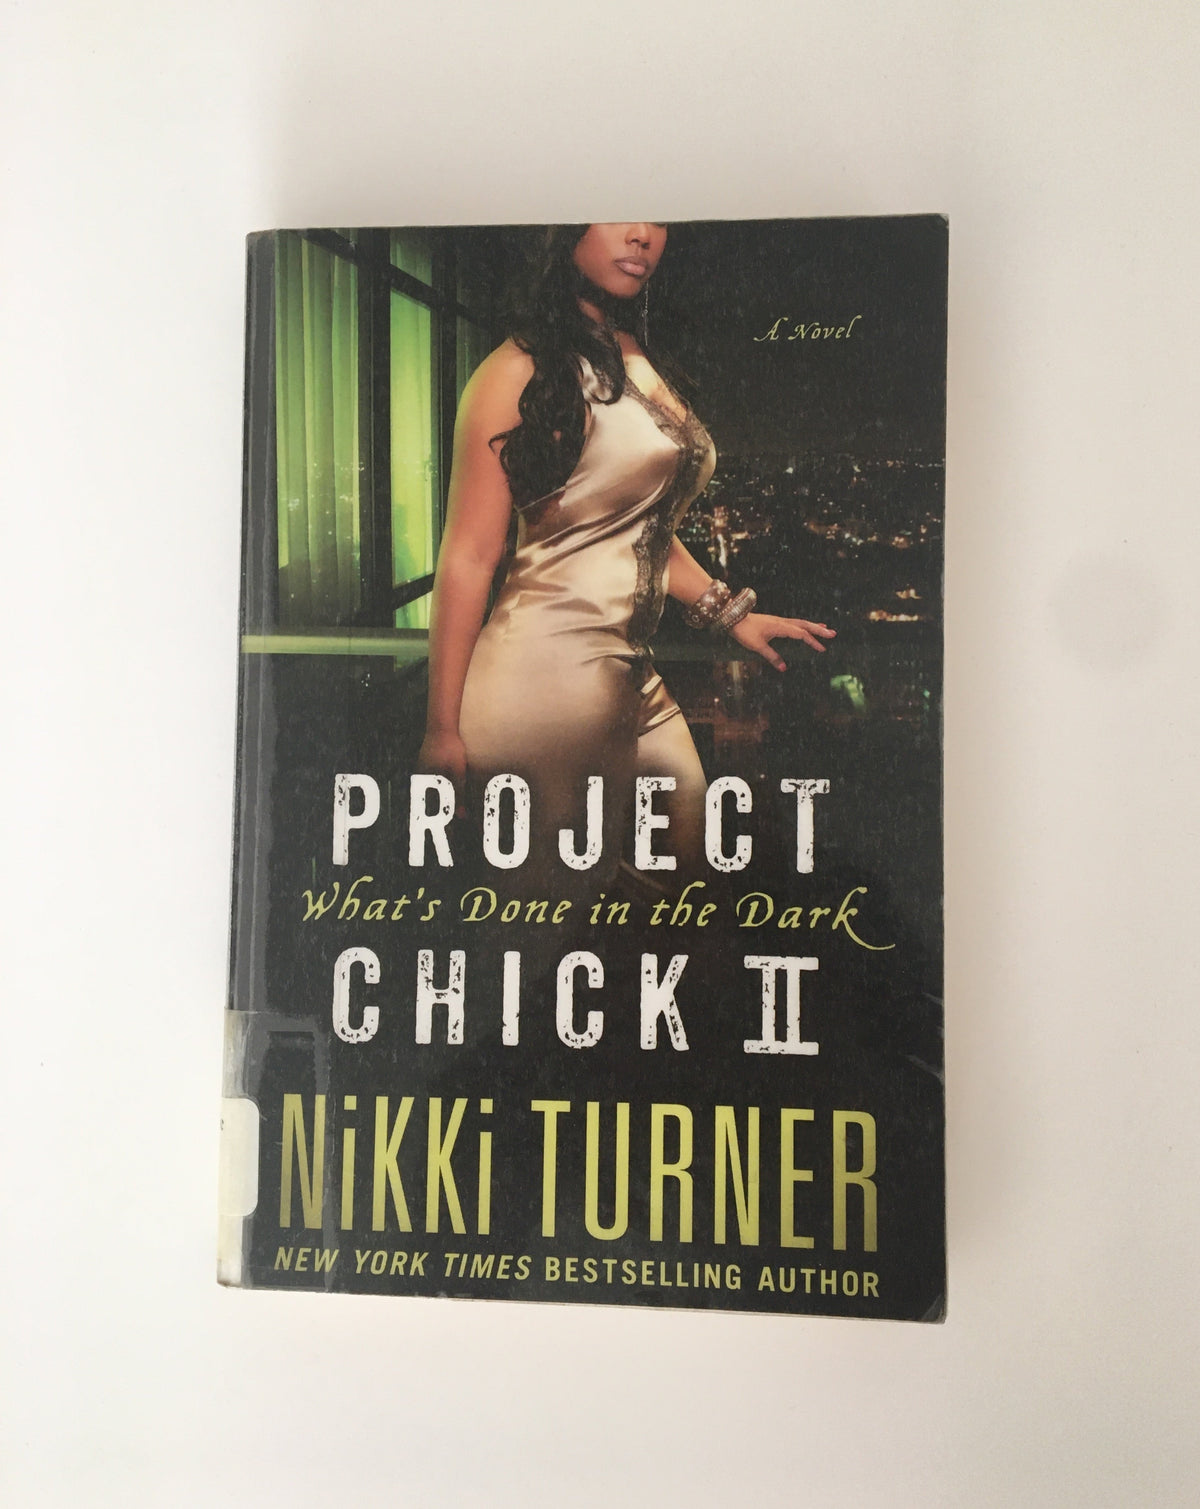 Project Chick II by Nikki Turner